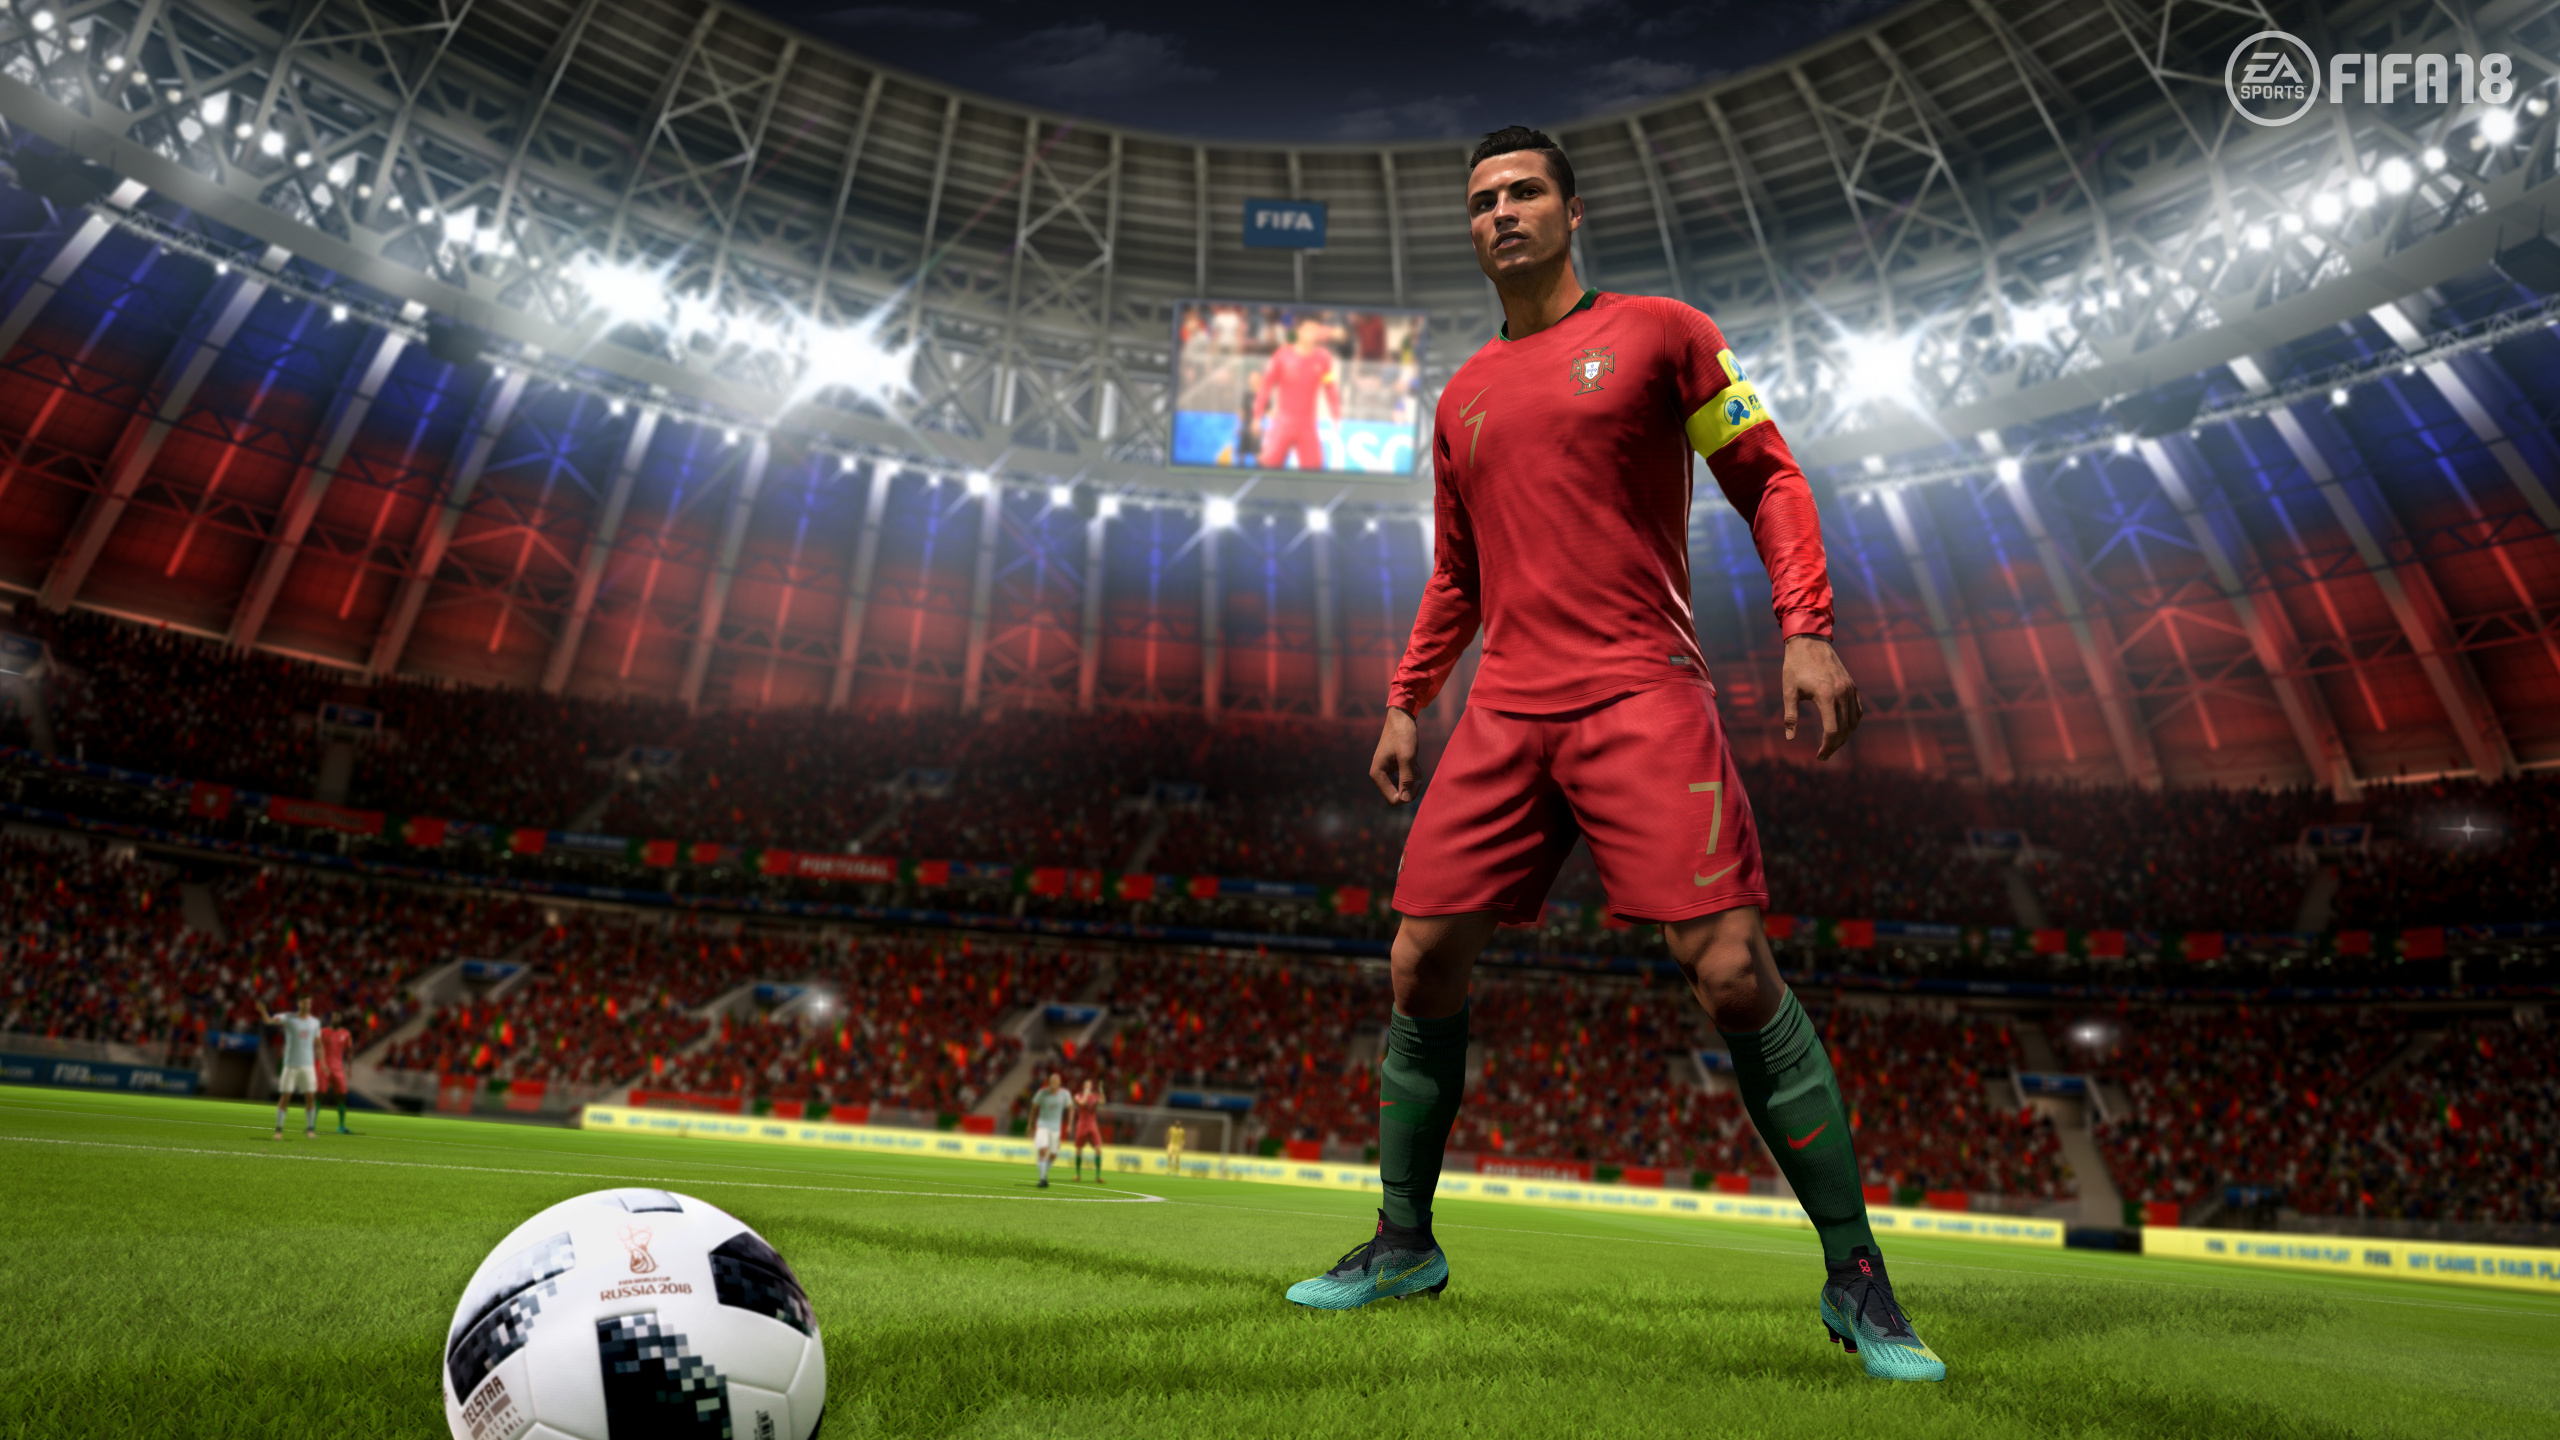 FIFA 18, 2018 World Cup, ea Sports, Electronic Arts, Playstation 4. Wallpaper in 2560x1440 Resolution